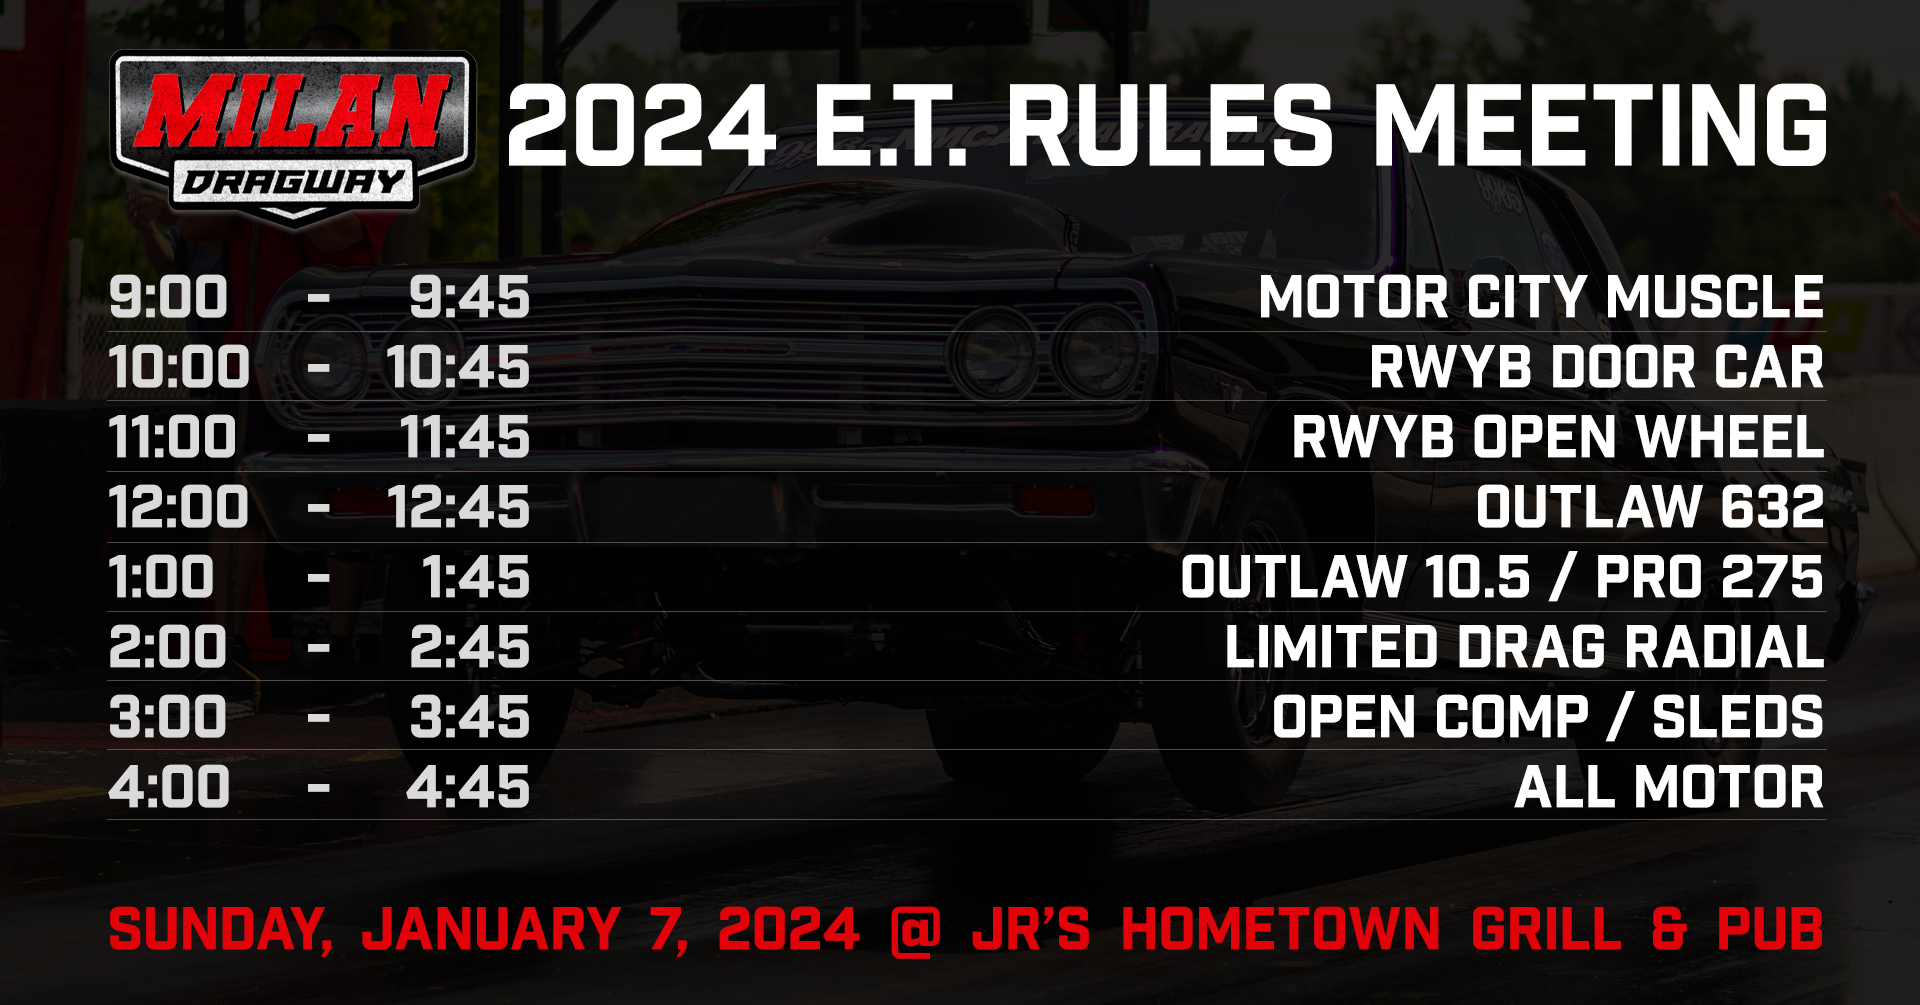 2024 E.T. Rules Meeting Information